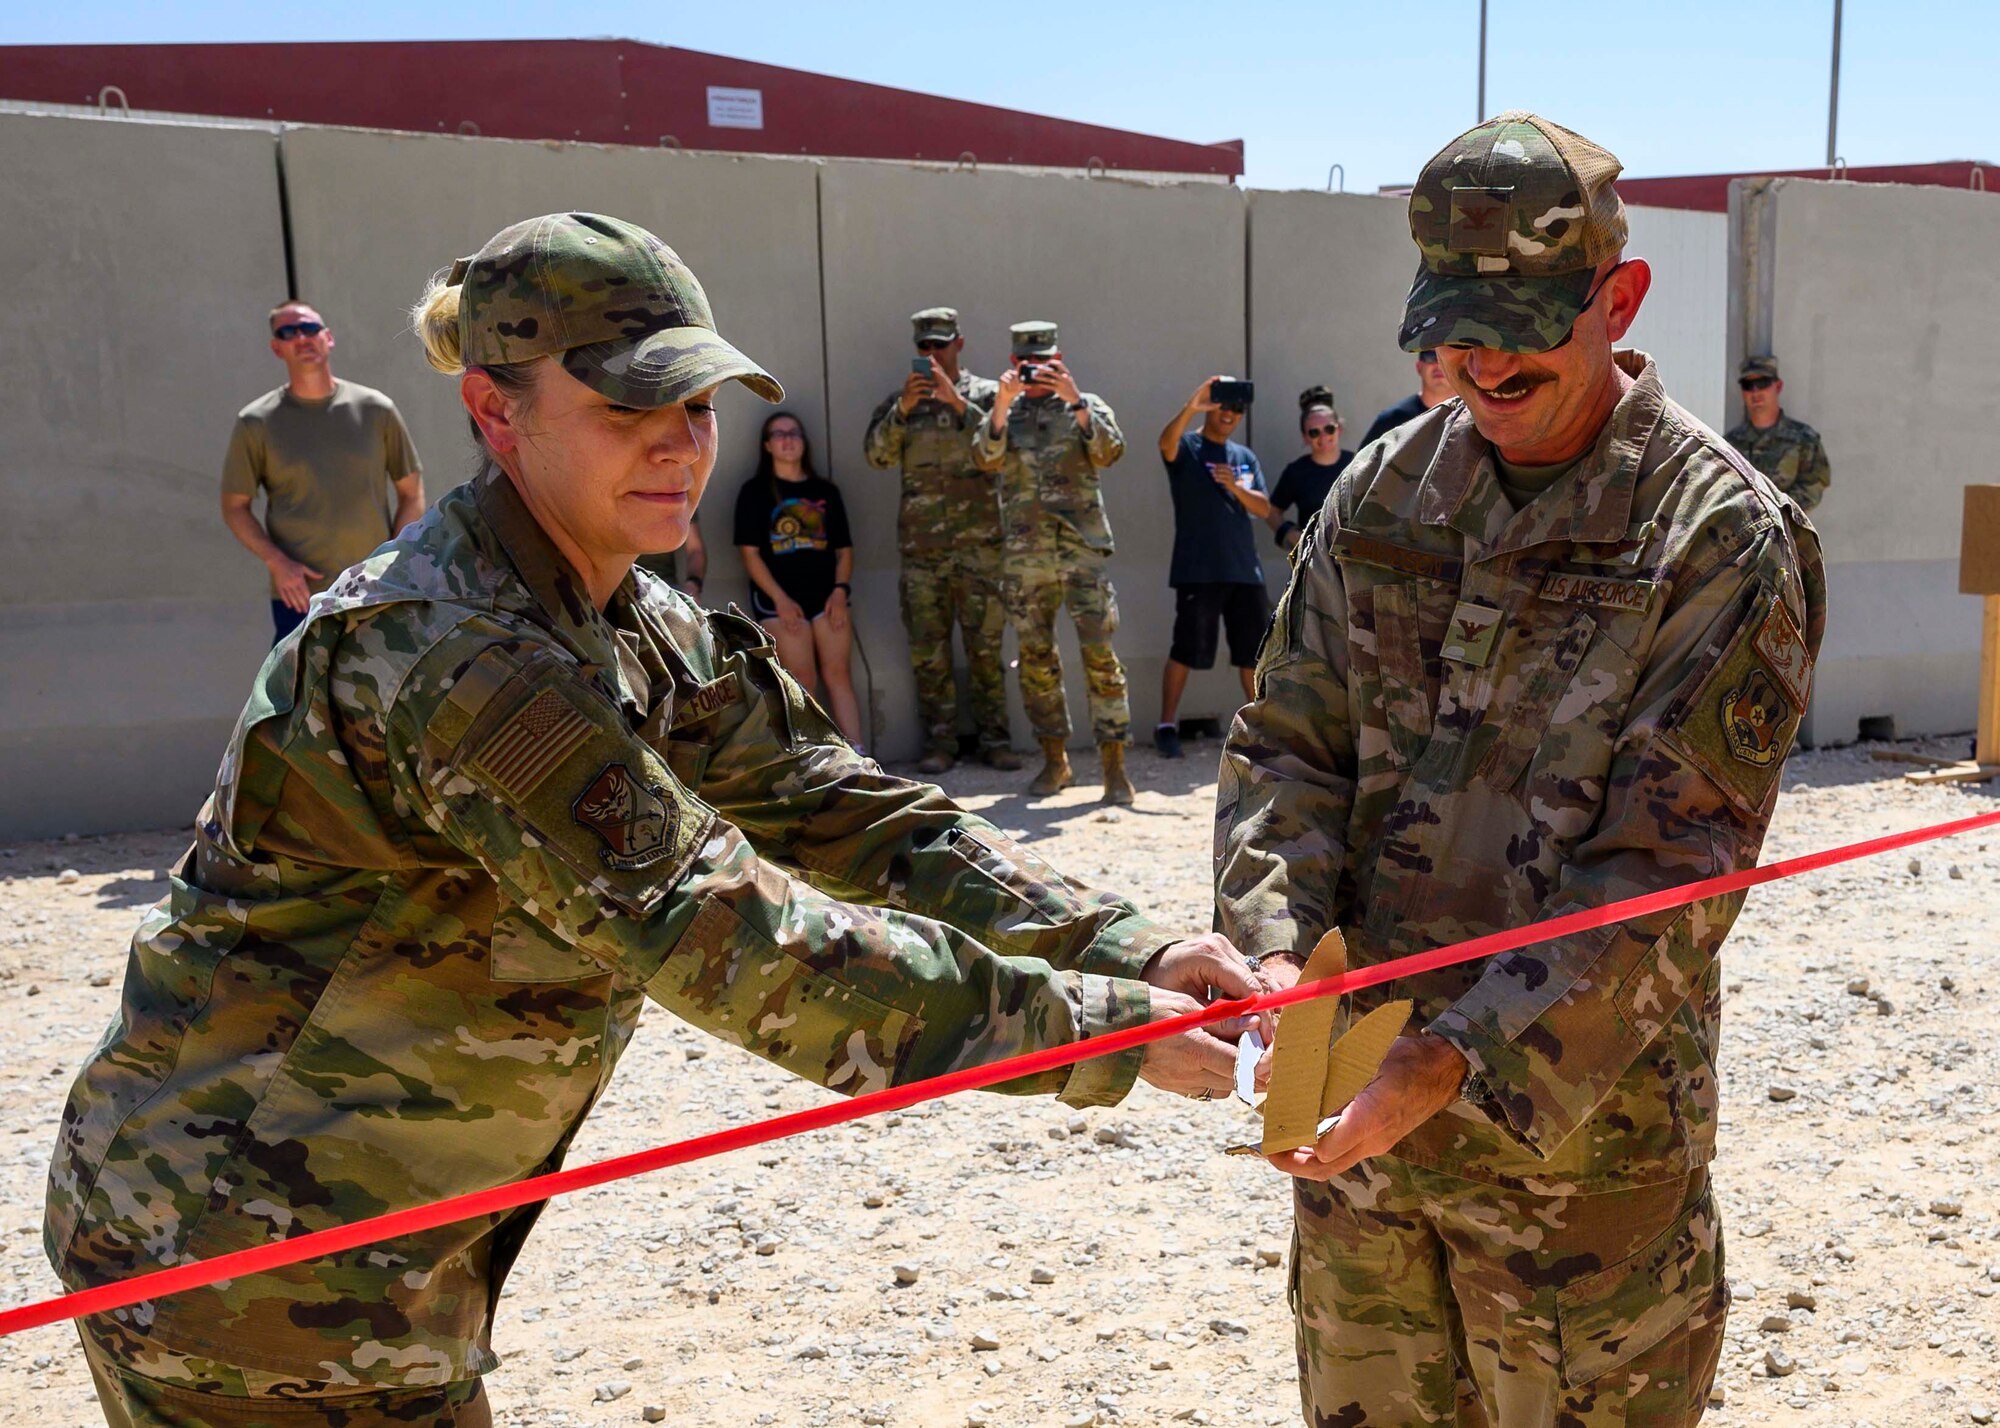 U.S. Air Force Col. Kevin Davidson, 378th Air Expeditionary Wing vice commander, and U.S Air Force Staff Sgt. Allison Fine, 378th Air Expeditionary Wing military justice noncommissioned officer-in-charge, cuts the ribbon symbolizing the opening of the U.S. Serve-Us Members Attic, Prince Sultan Air Base, Kingdom of Saudi Arabia, Sept. 11 2021. The attic acts as an organized donation center open around-the-clock for gently-used items and was started by an all-volunteer team led by Fine, modeled after the concept of an Airman’s Attic found on most Air Force bases. Joint members leaving PSAB are now able to donate unneeded items prior to departure while new members can acquire needed items for free, saving money and reducing the amount of waste produced at PSAB. (U.S. Air Force photo by Senior Airman Samuel Earick)